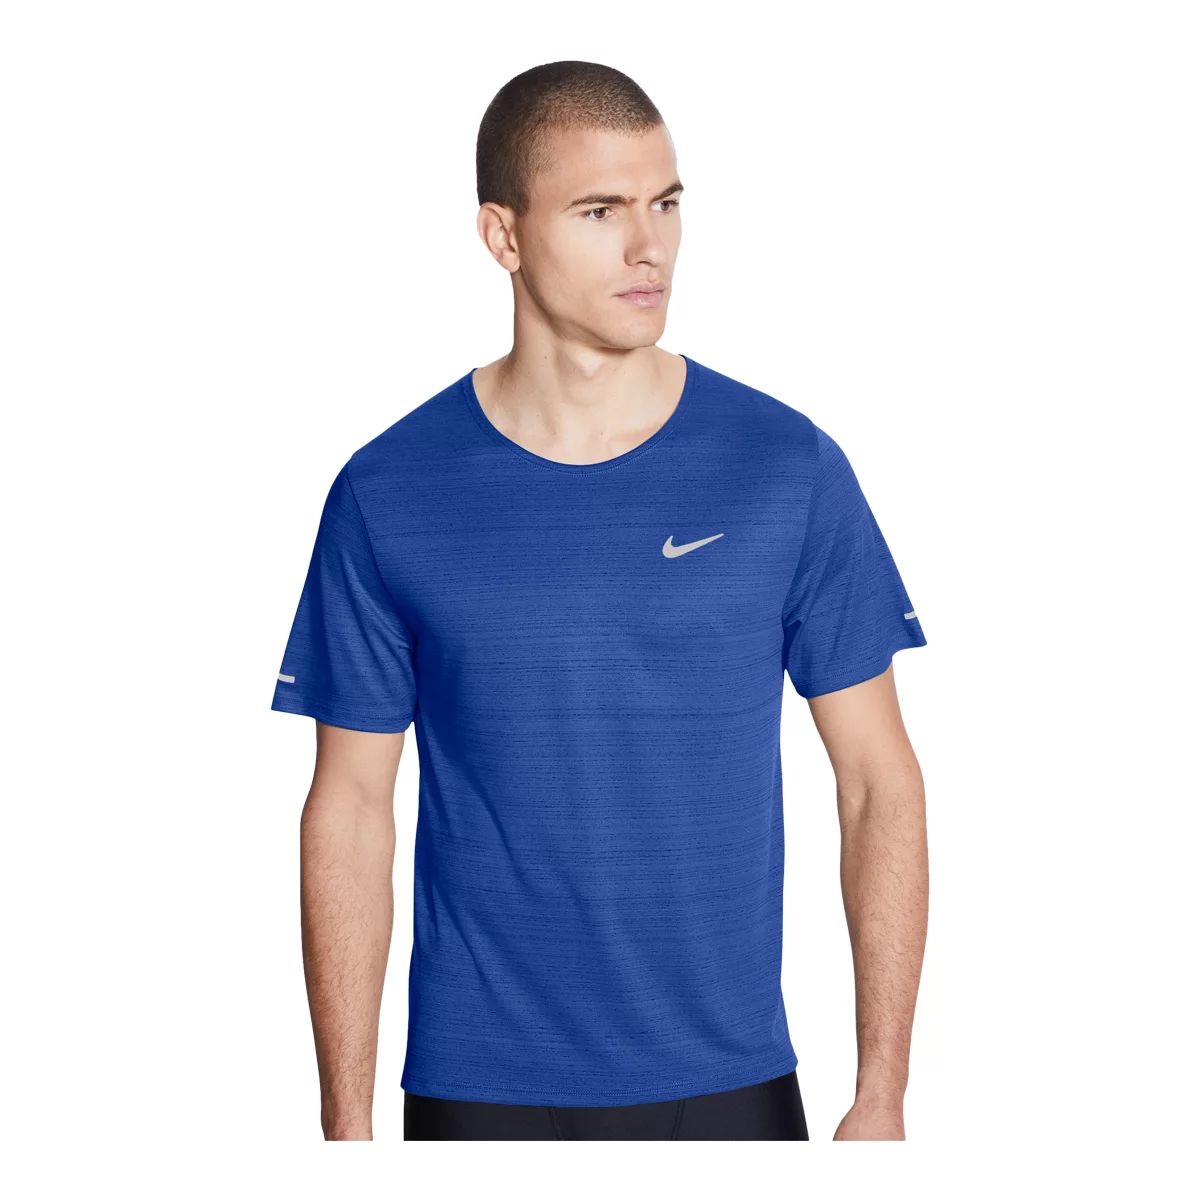 https://media-www.atmosphere.ca/product/div-03-softgoods/dpt-70-athletic-clothing/sdpt-01-mens/333301812/nike-miler-ss-top-q121-royal-game-royal-reflective-silv-game-royal-reflective-silv-s--cc51c29e-cb17-4e50-8fd6-e9787f67ab4c-jpgrendition.jpg?imdensity=1&imwidth=1244&impolicy=mZoom